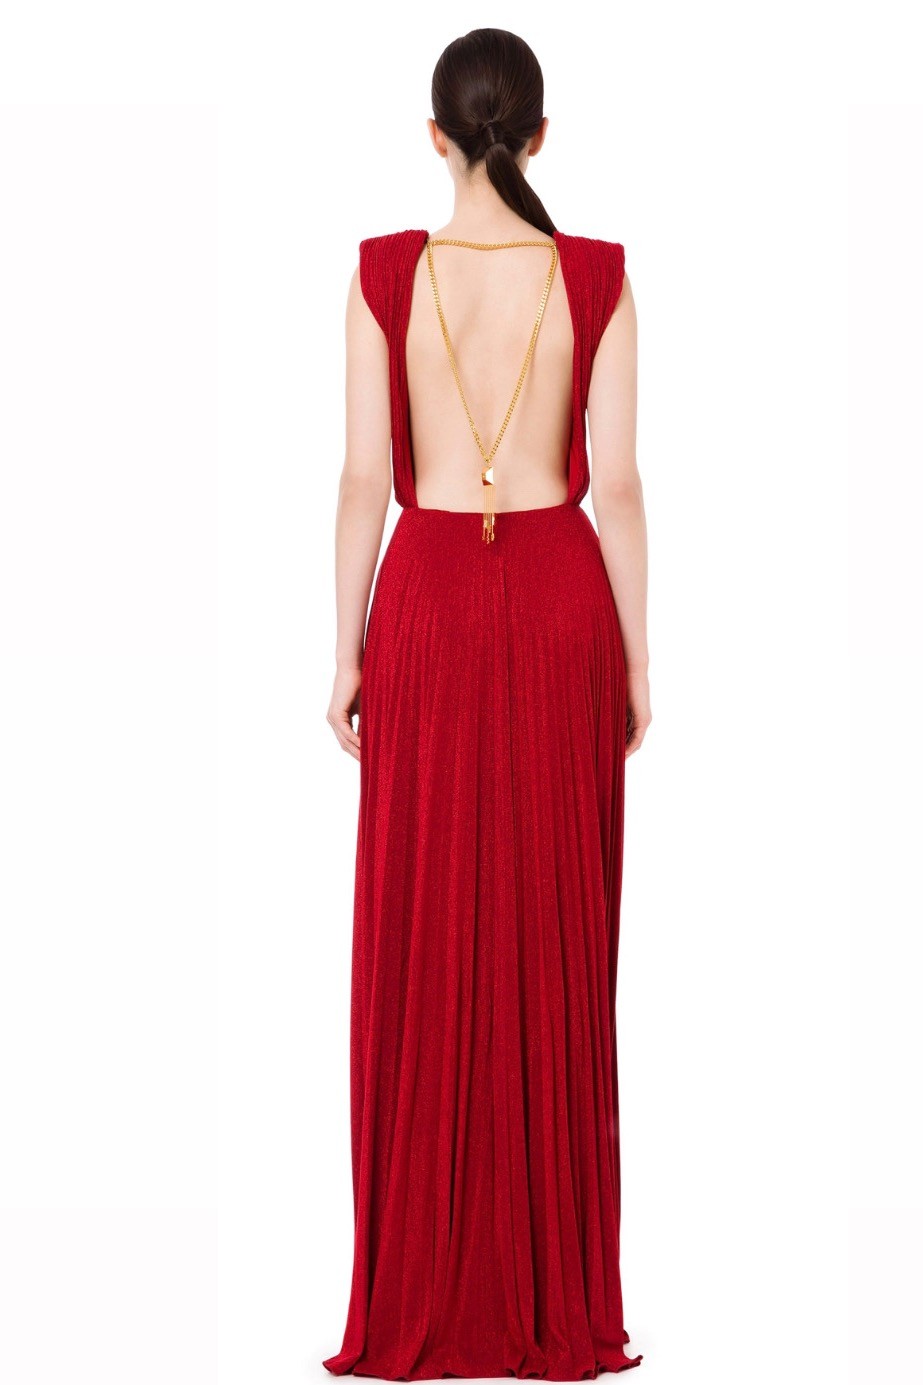 Red Carpet Dress In Lurex Jersey With Pendant Charm - Red